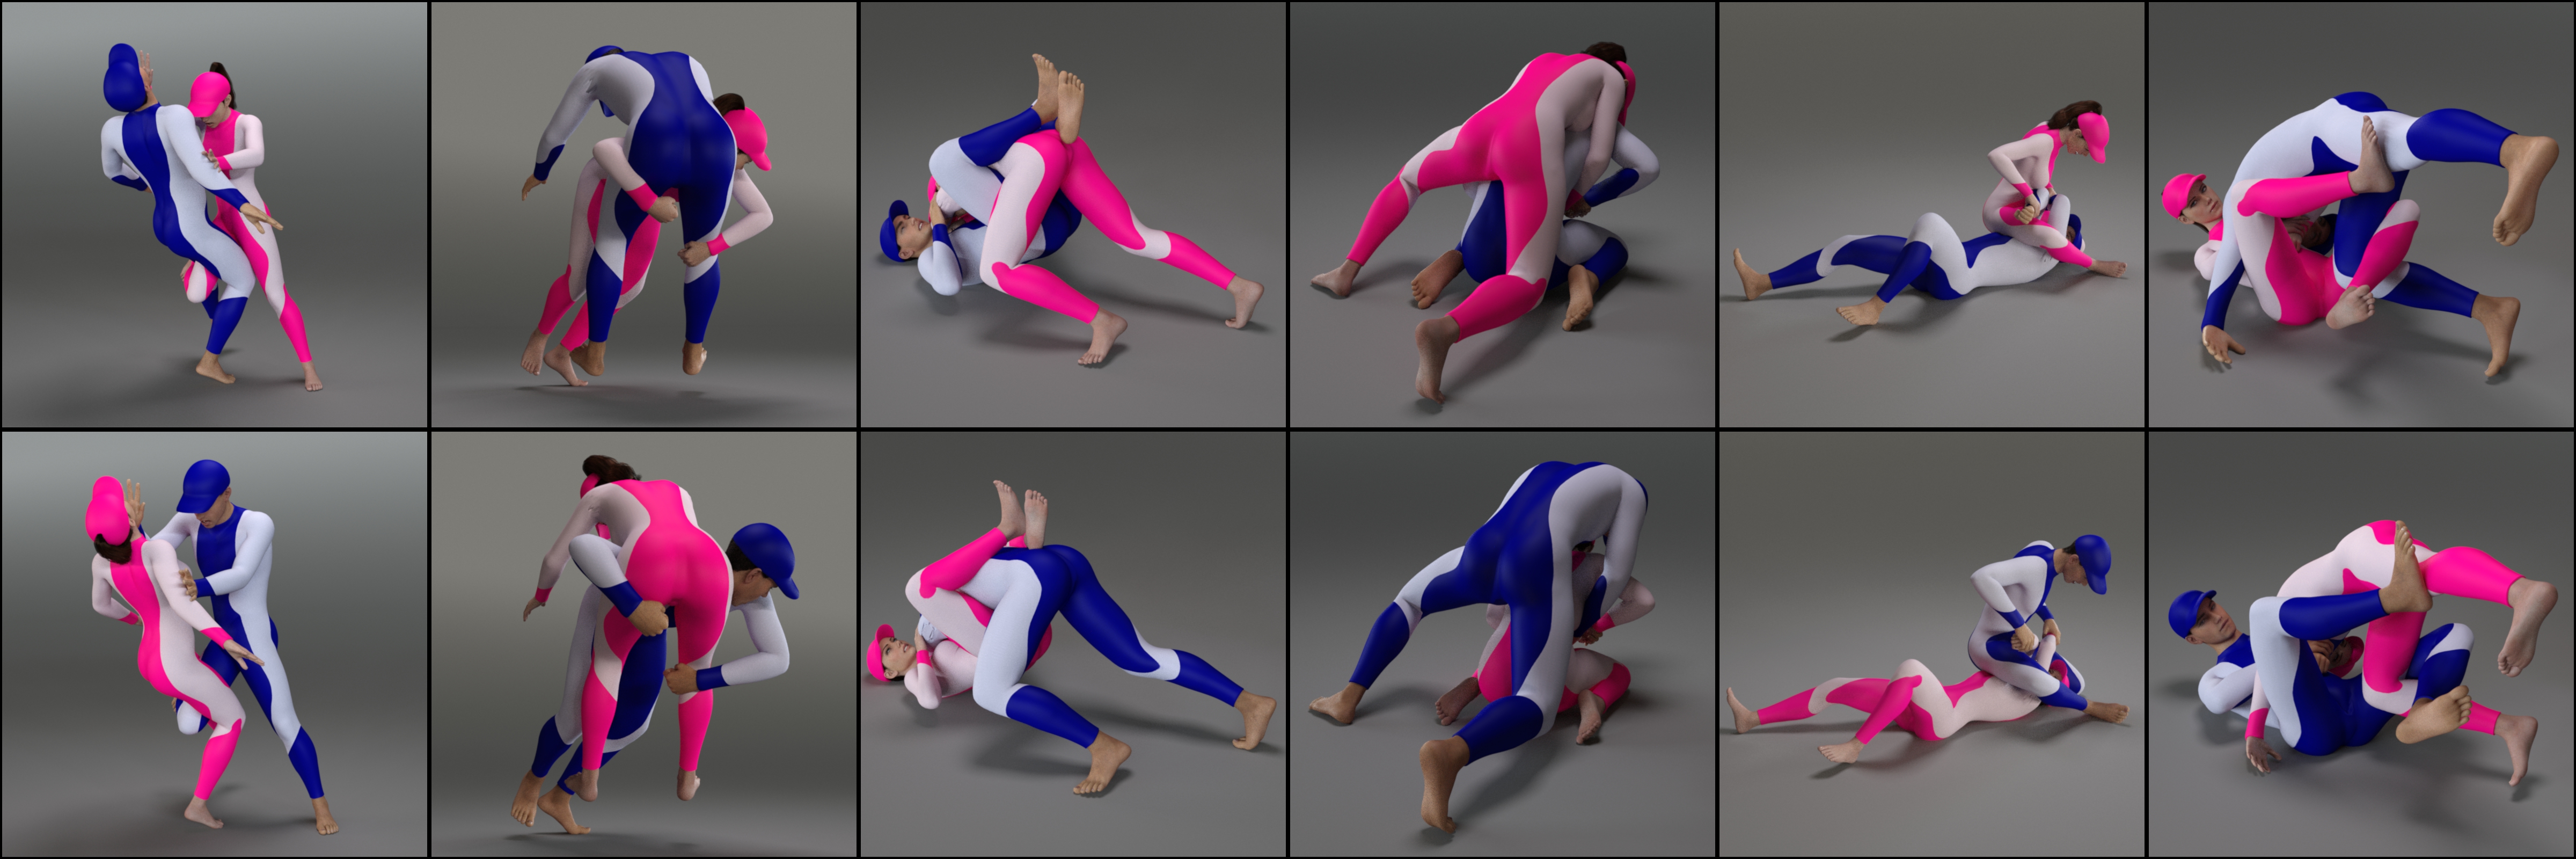 Grappling Poses Volume 4 for Genesis 8 and 8.1 by: atrilliongames, 3D Models by Daz 3D